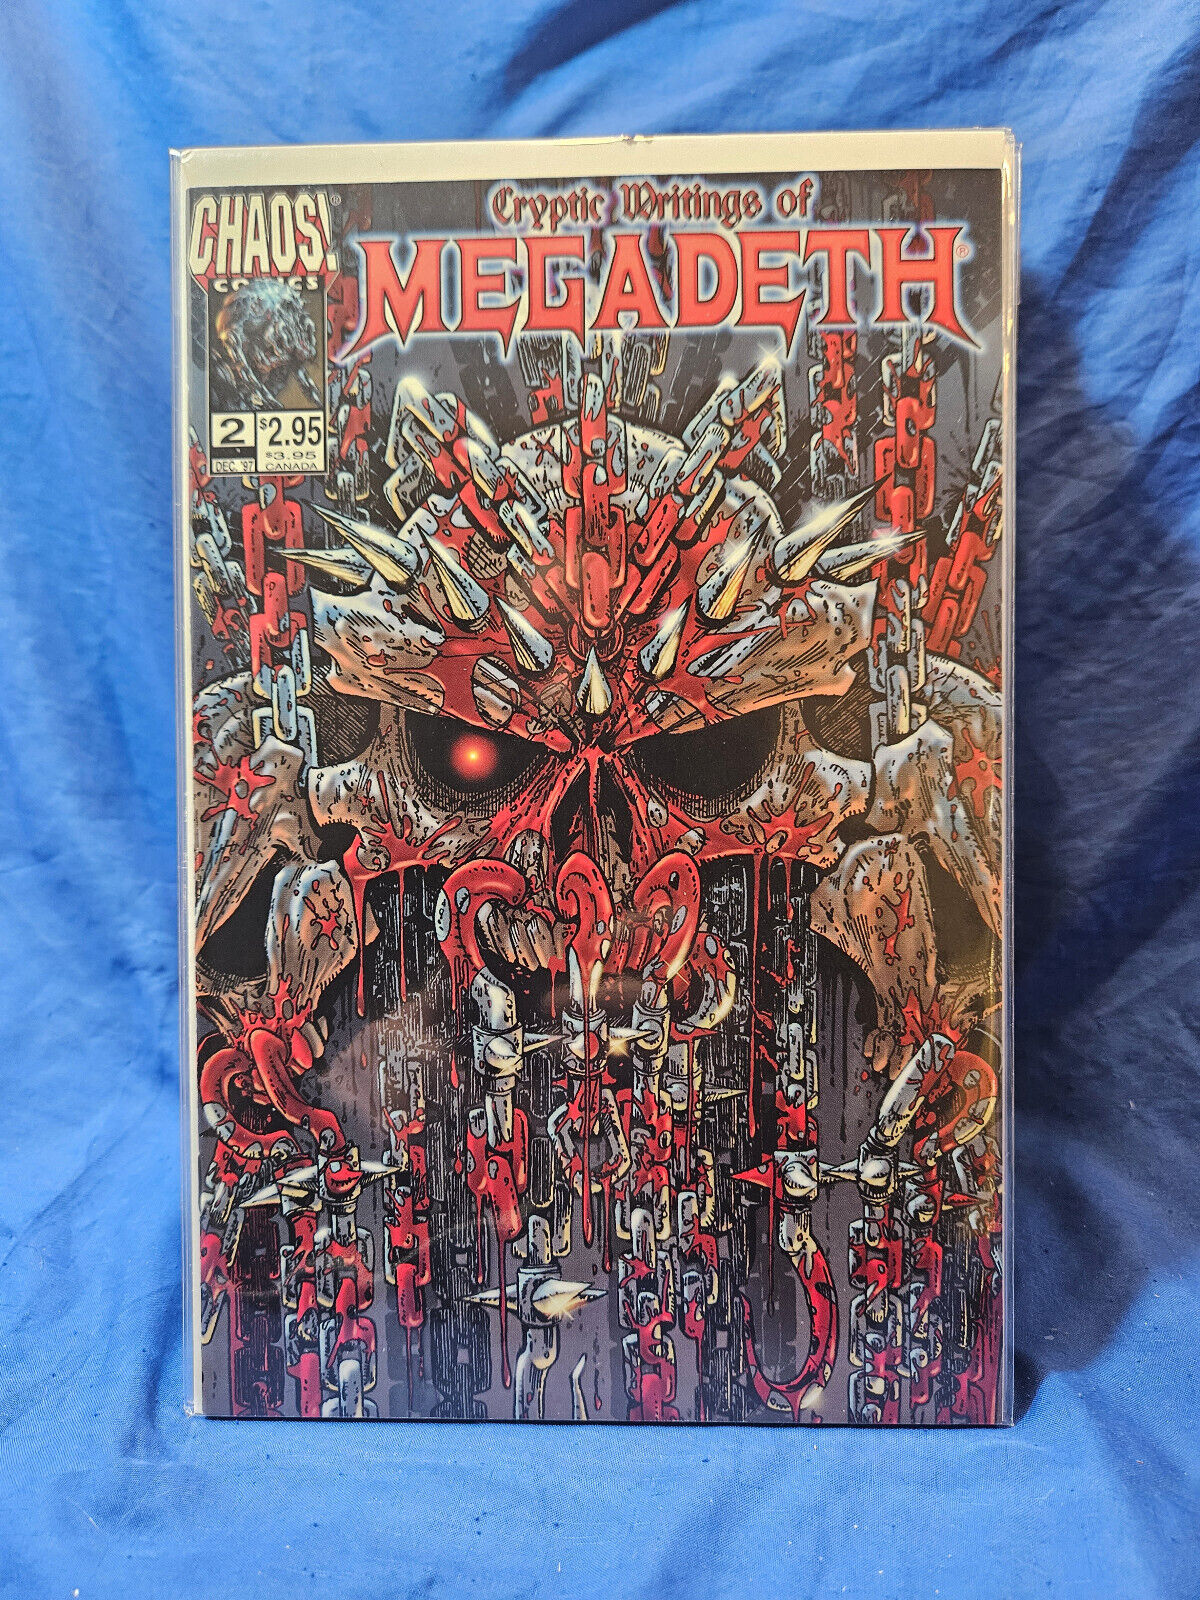 CRYPTIC WRITINGS OF MEGADETH #2 Chaos 1997 Dave Mustaine Brian Pulido VF+